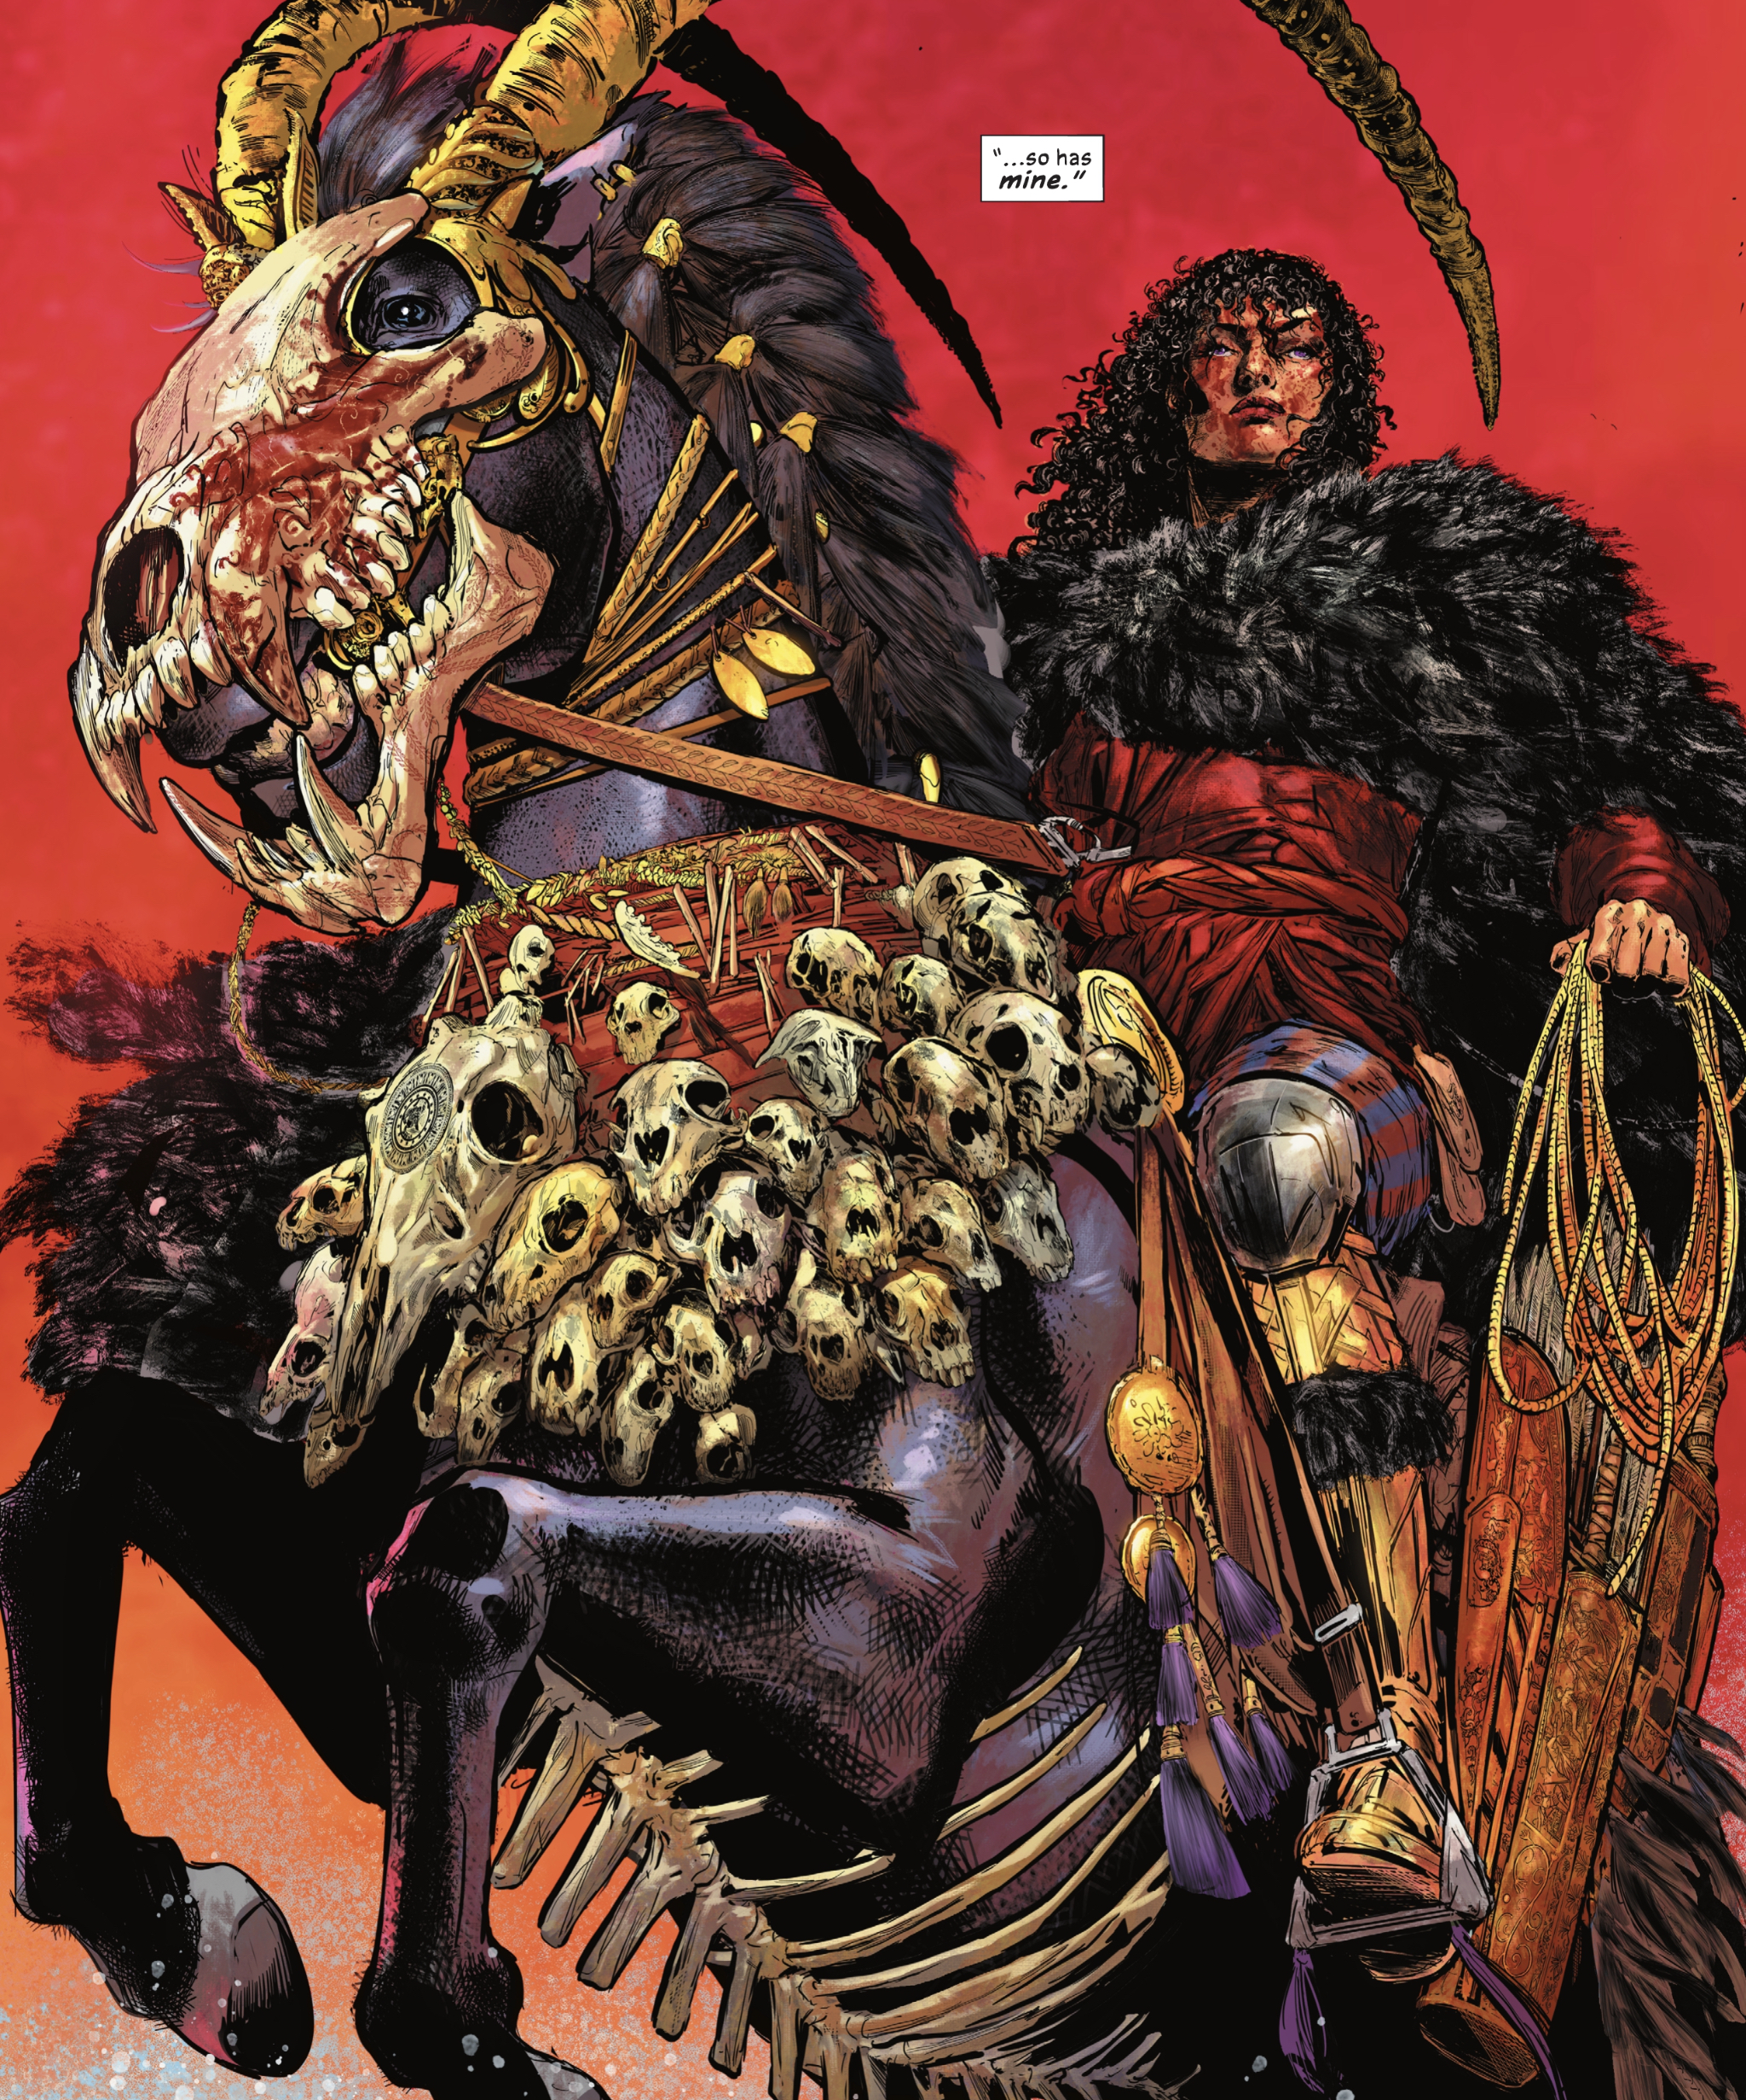 Hippolyta, bloody-faced, sits astride a rearing black steed adorned with gold and bones, grasping a golden lasso in her left hand in Wonder Woman Historia: The Amazons #1 (2021). 